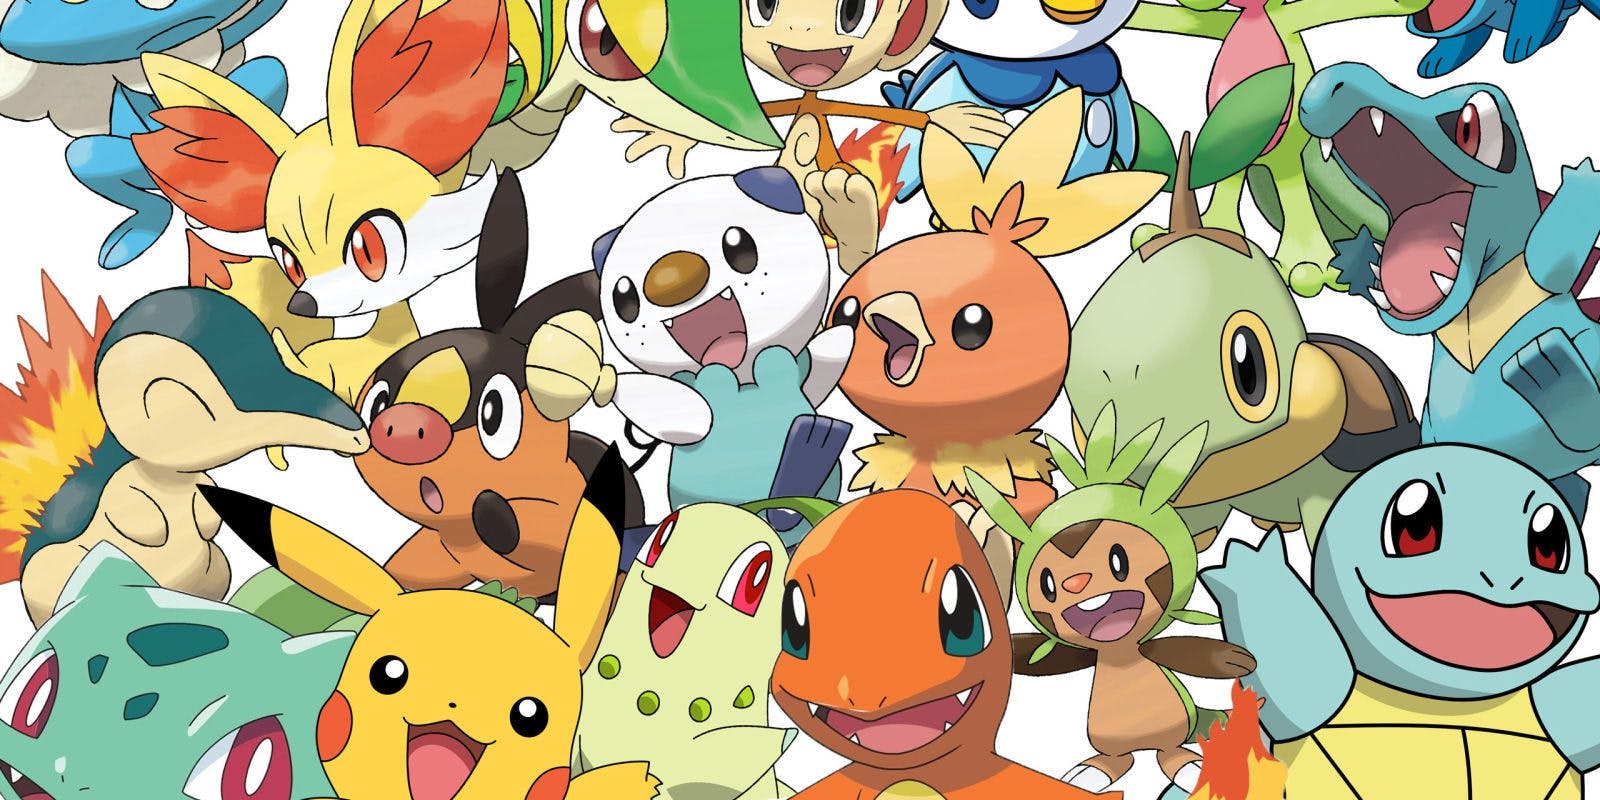 A vibrant wallpaper showcasing numerous Pokemon characters, capturing the essence of their diversity and charm.